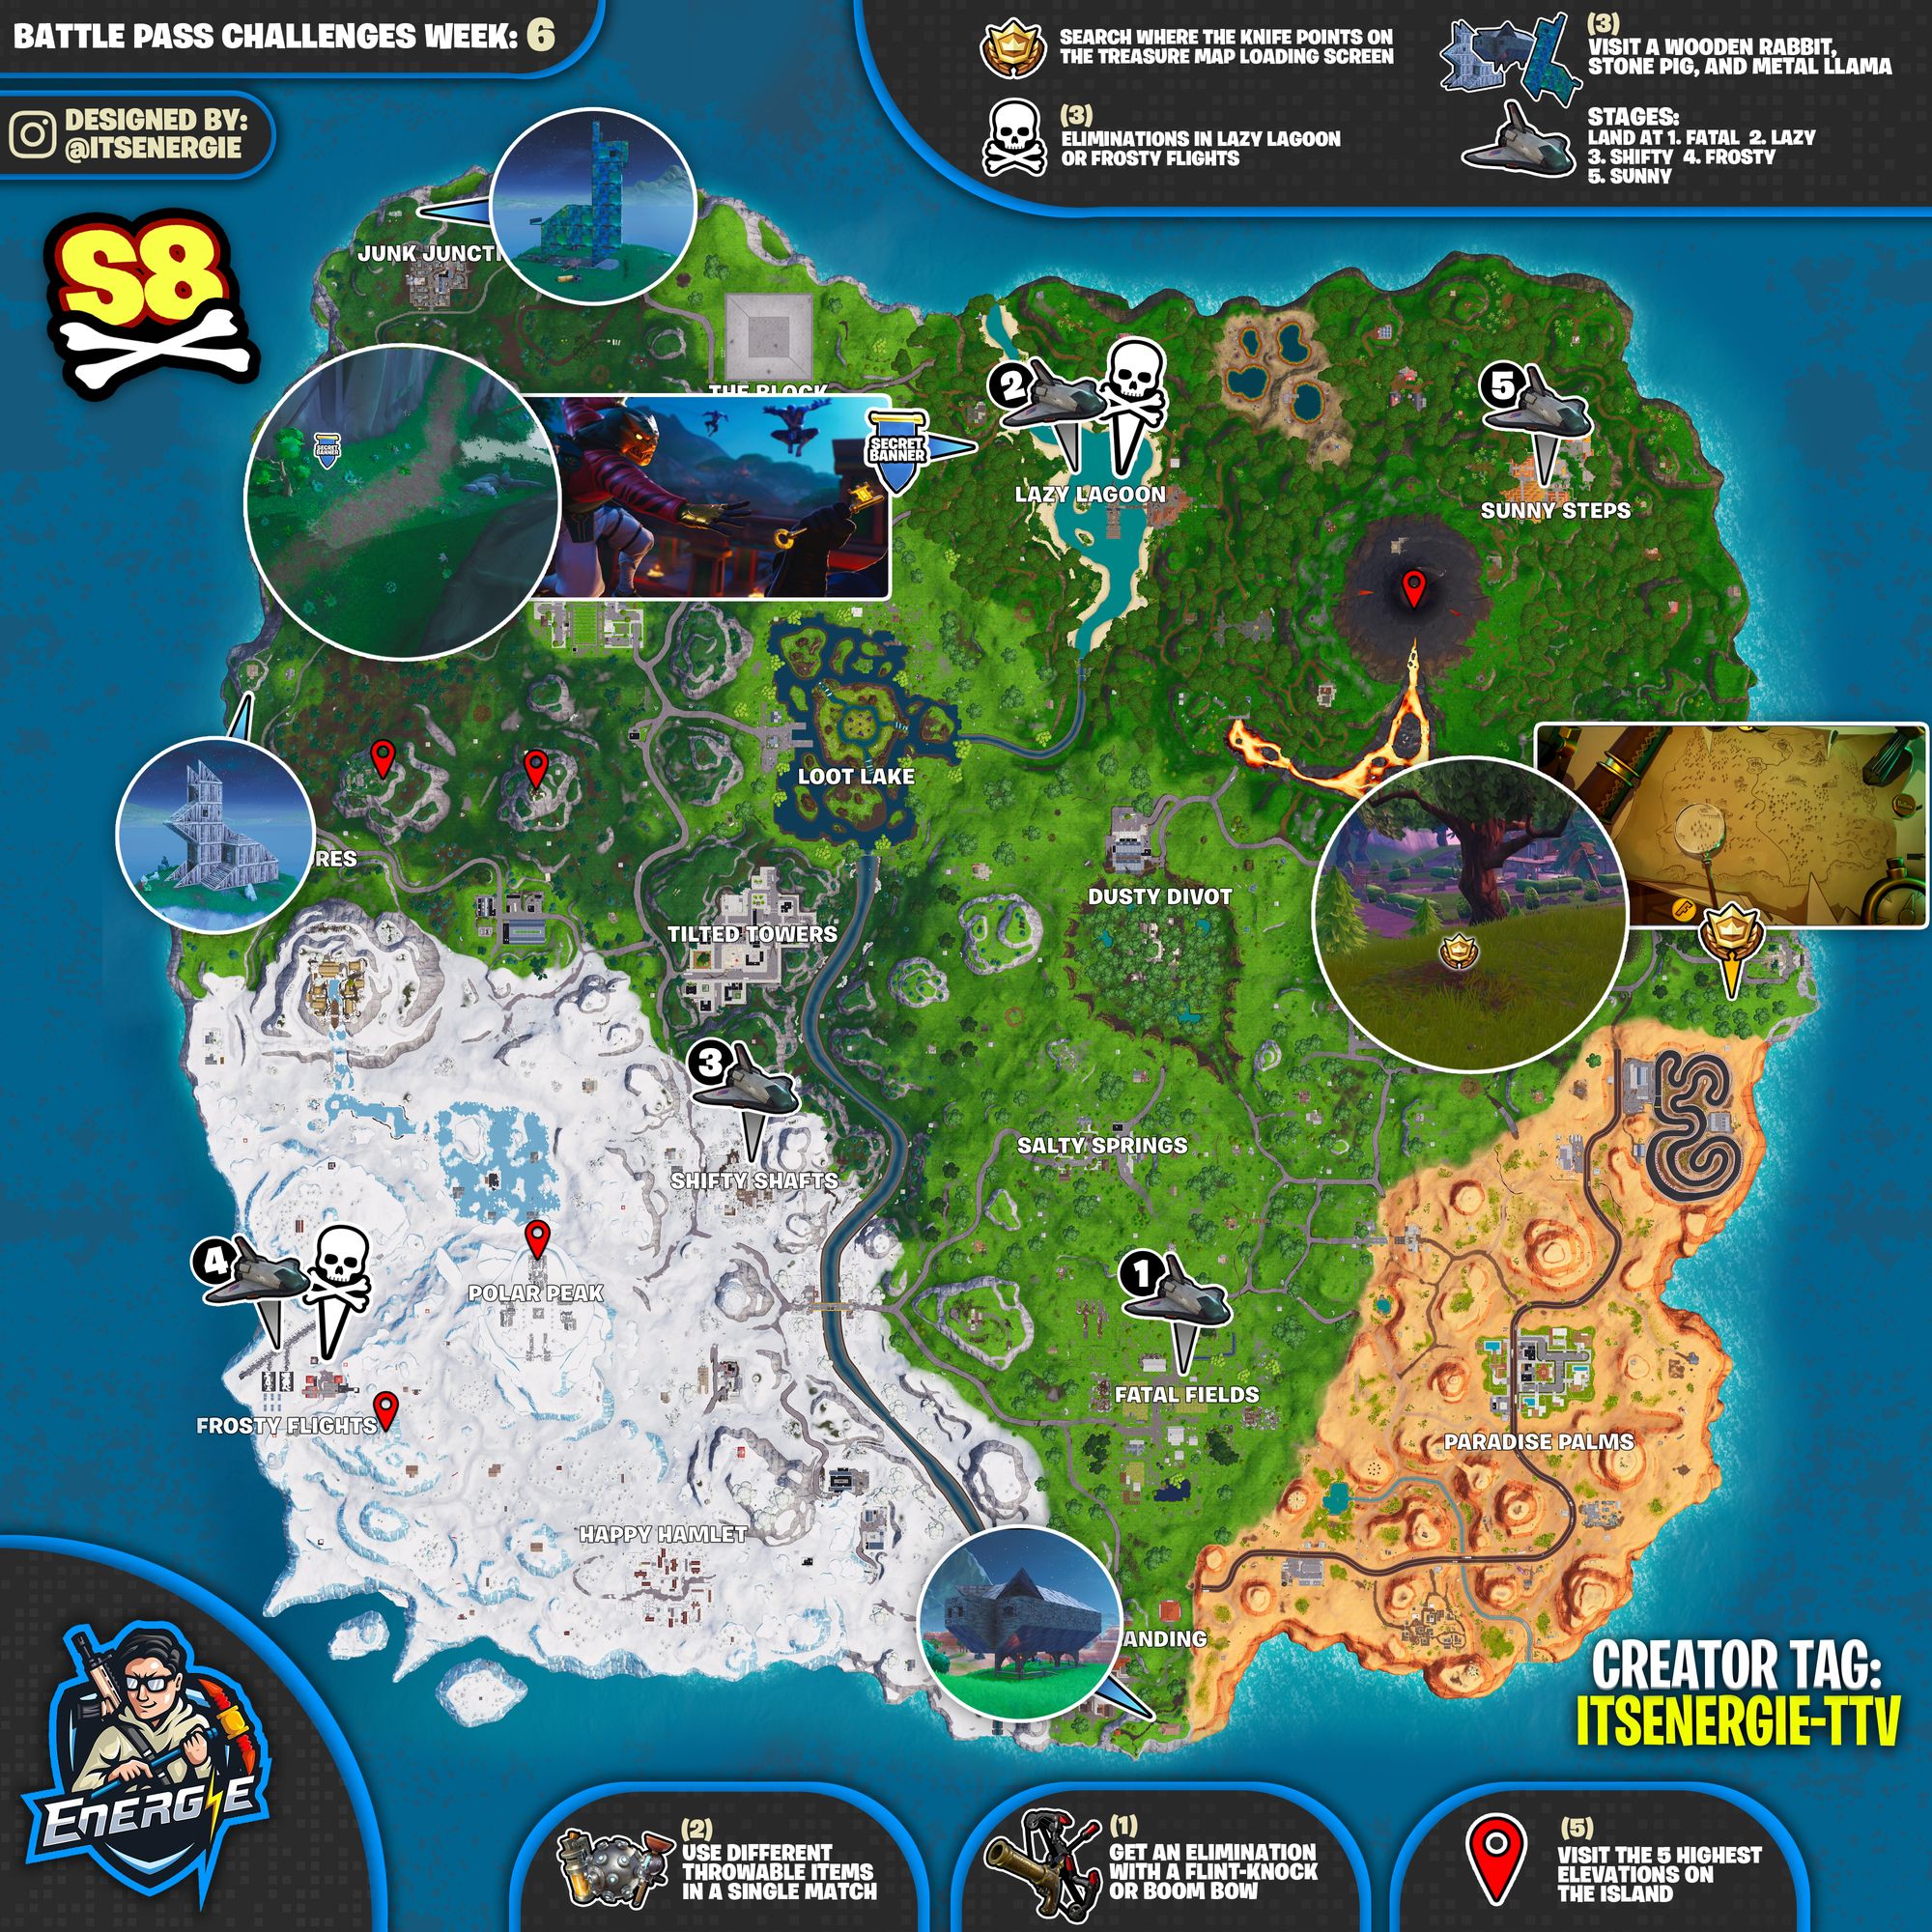 struggling with this week s challenges the cheat sheet mastermind itsenergie has put together another cheat sheet to make our lives a little bit easier - lama fortnite map saison 8